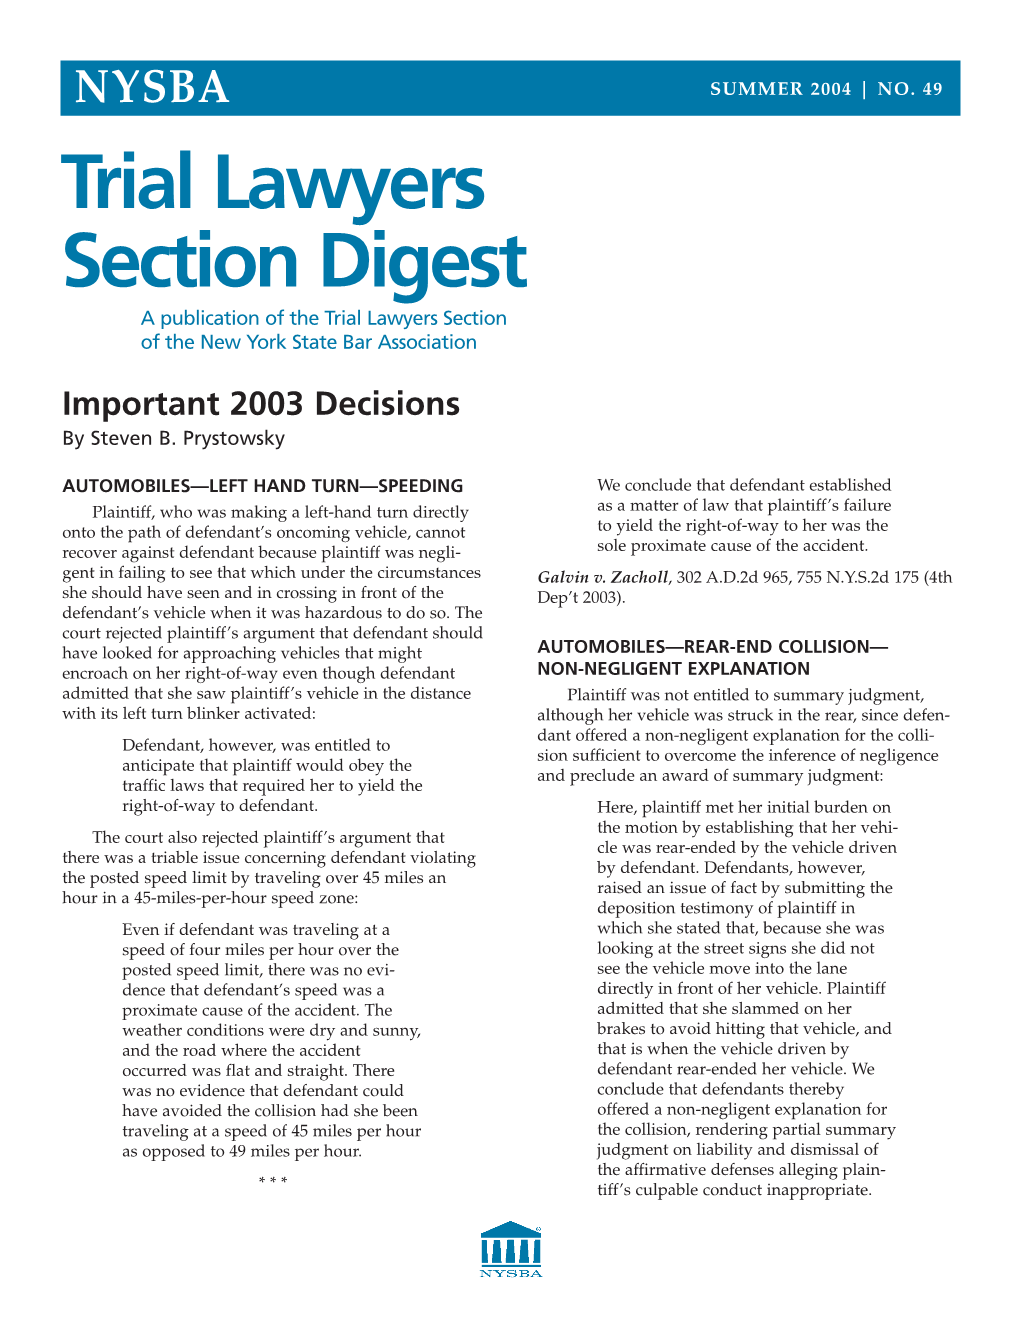 Trial Lawyers Section Digest a Publication of the Trial Lawyers Section of the New York State Bar Association